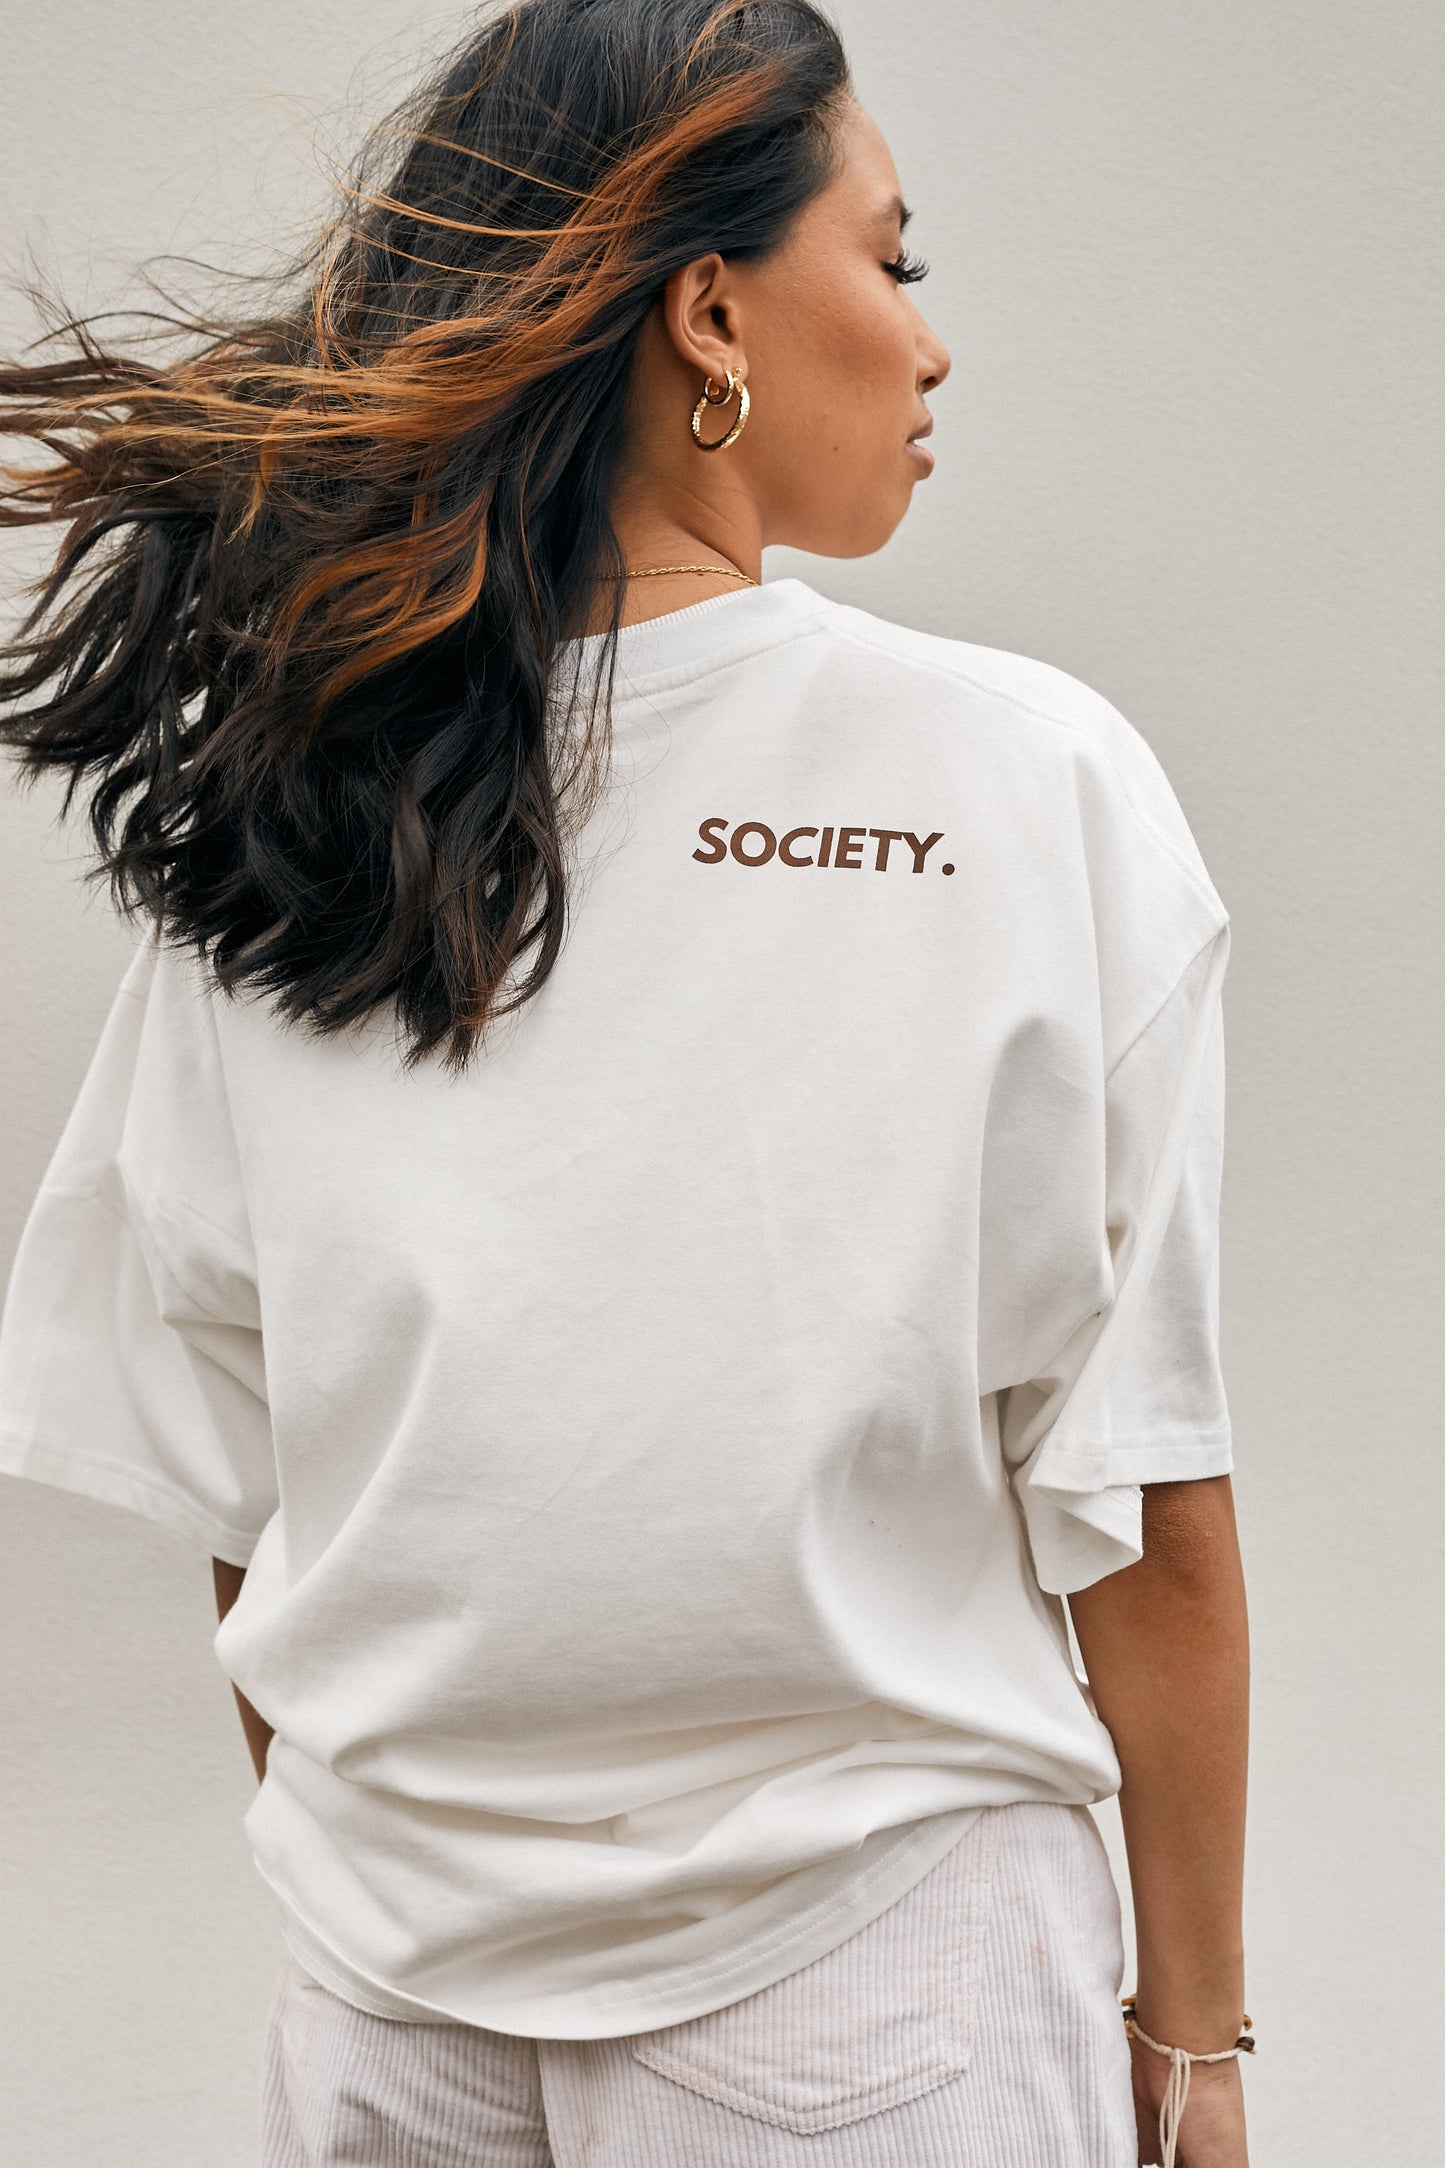 Influencing Society White Tee